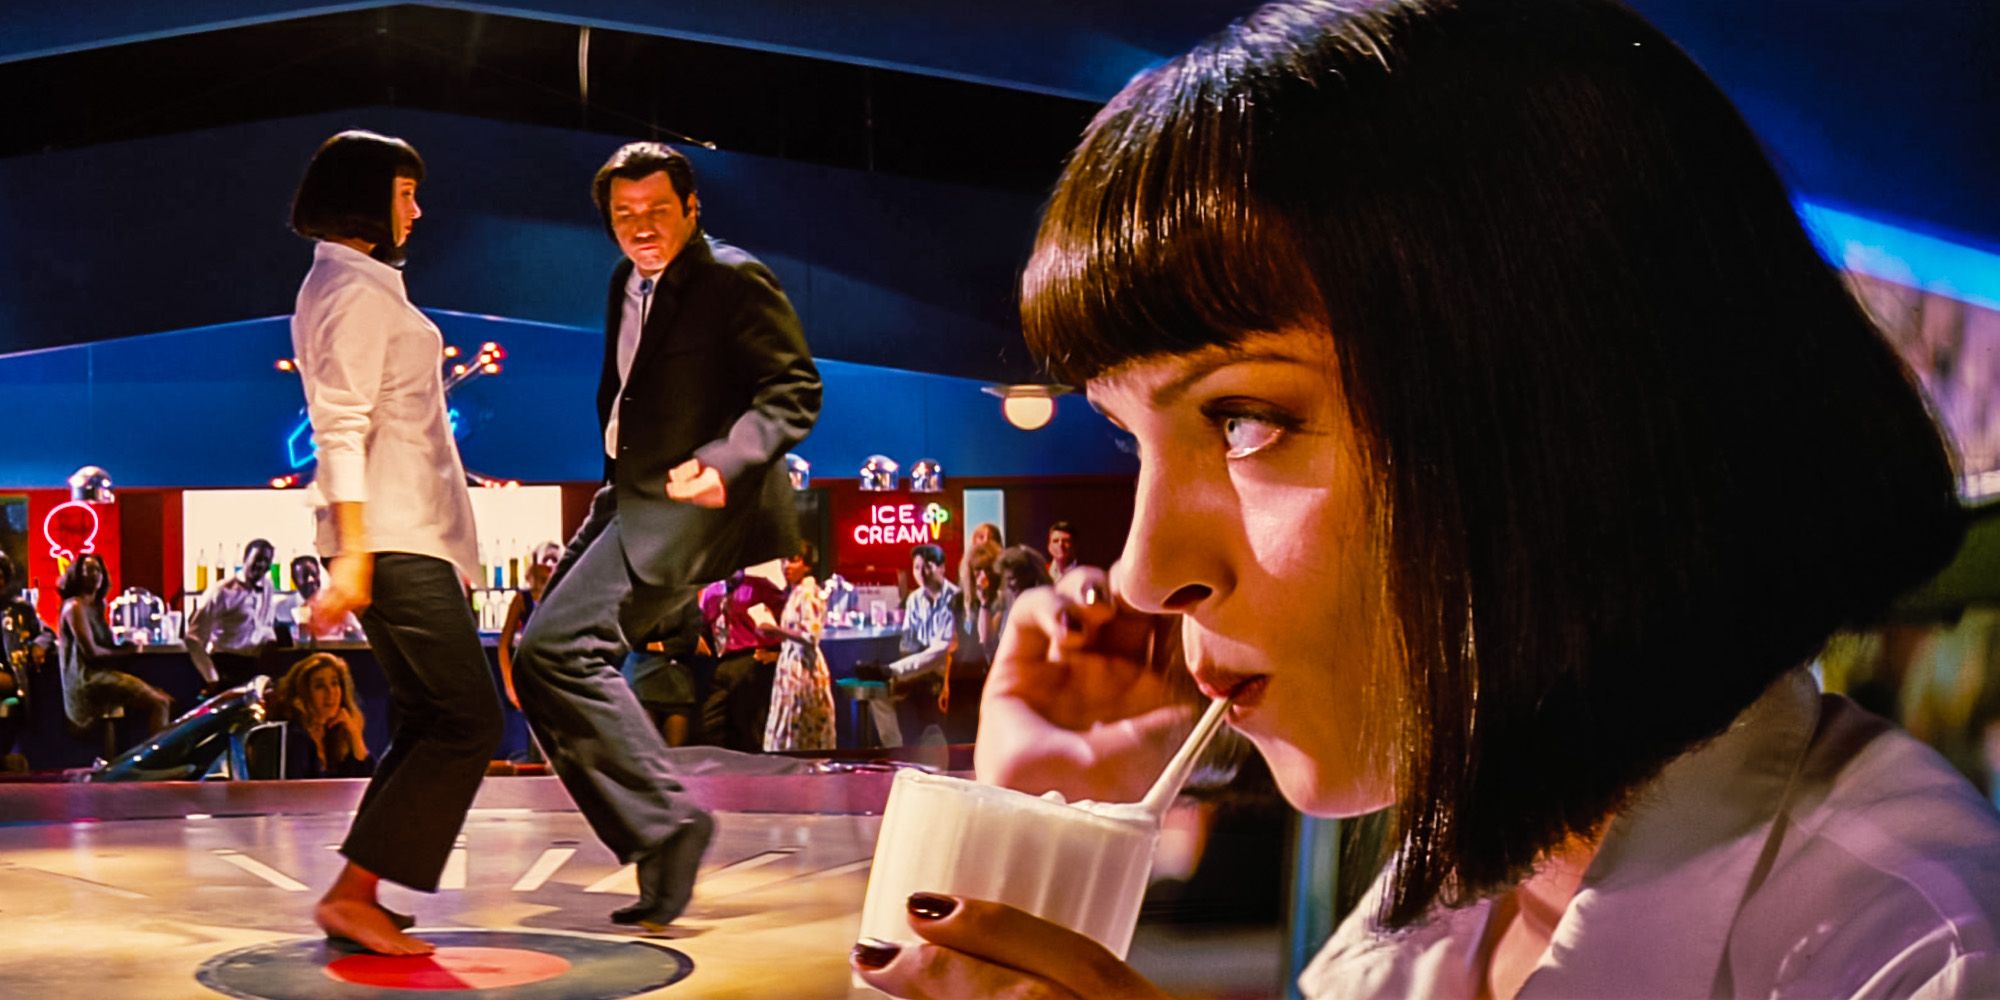 Did Vincent And Mia Win The Dance Contest Pulp Fiction Secretly Told You